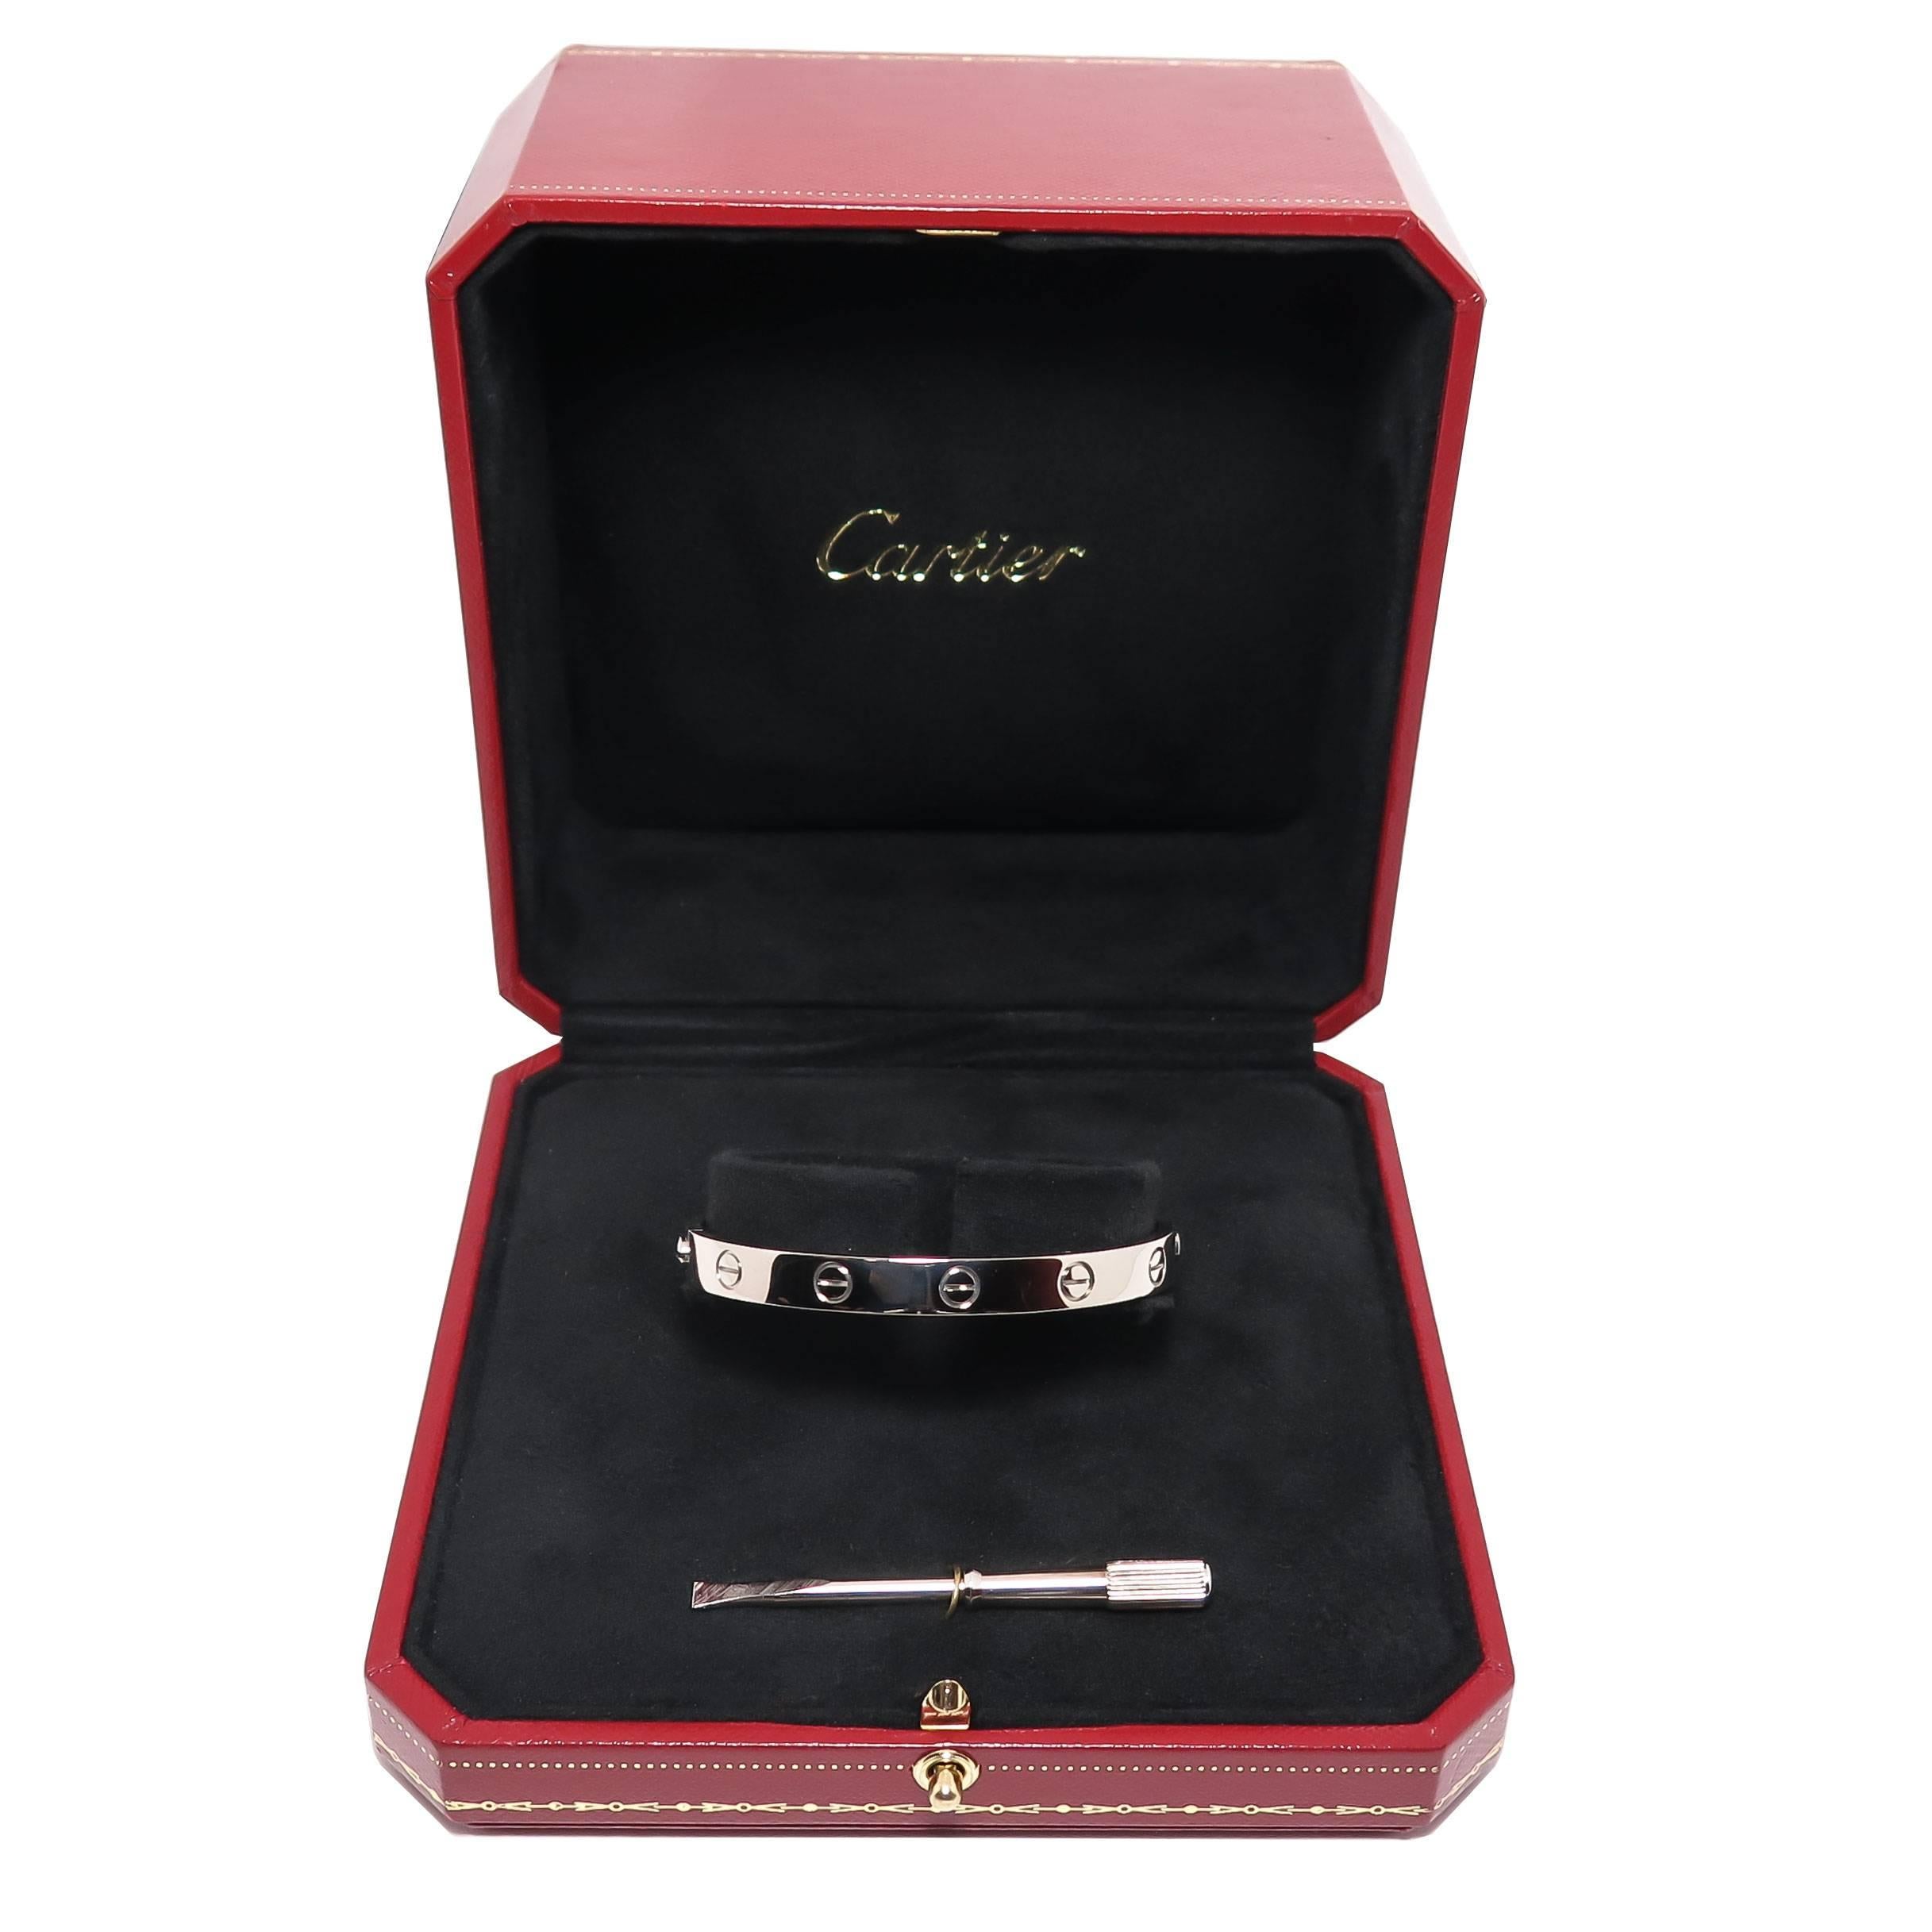 Circa 1990s Cartier 18K White Gold Classic Love Bracelet. Size 16 and measuring 6 MM wide. Signed, numbered and comes in original Presentation box with screw driver.